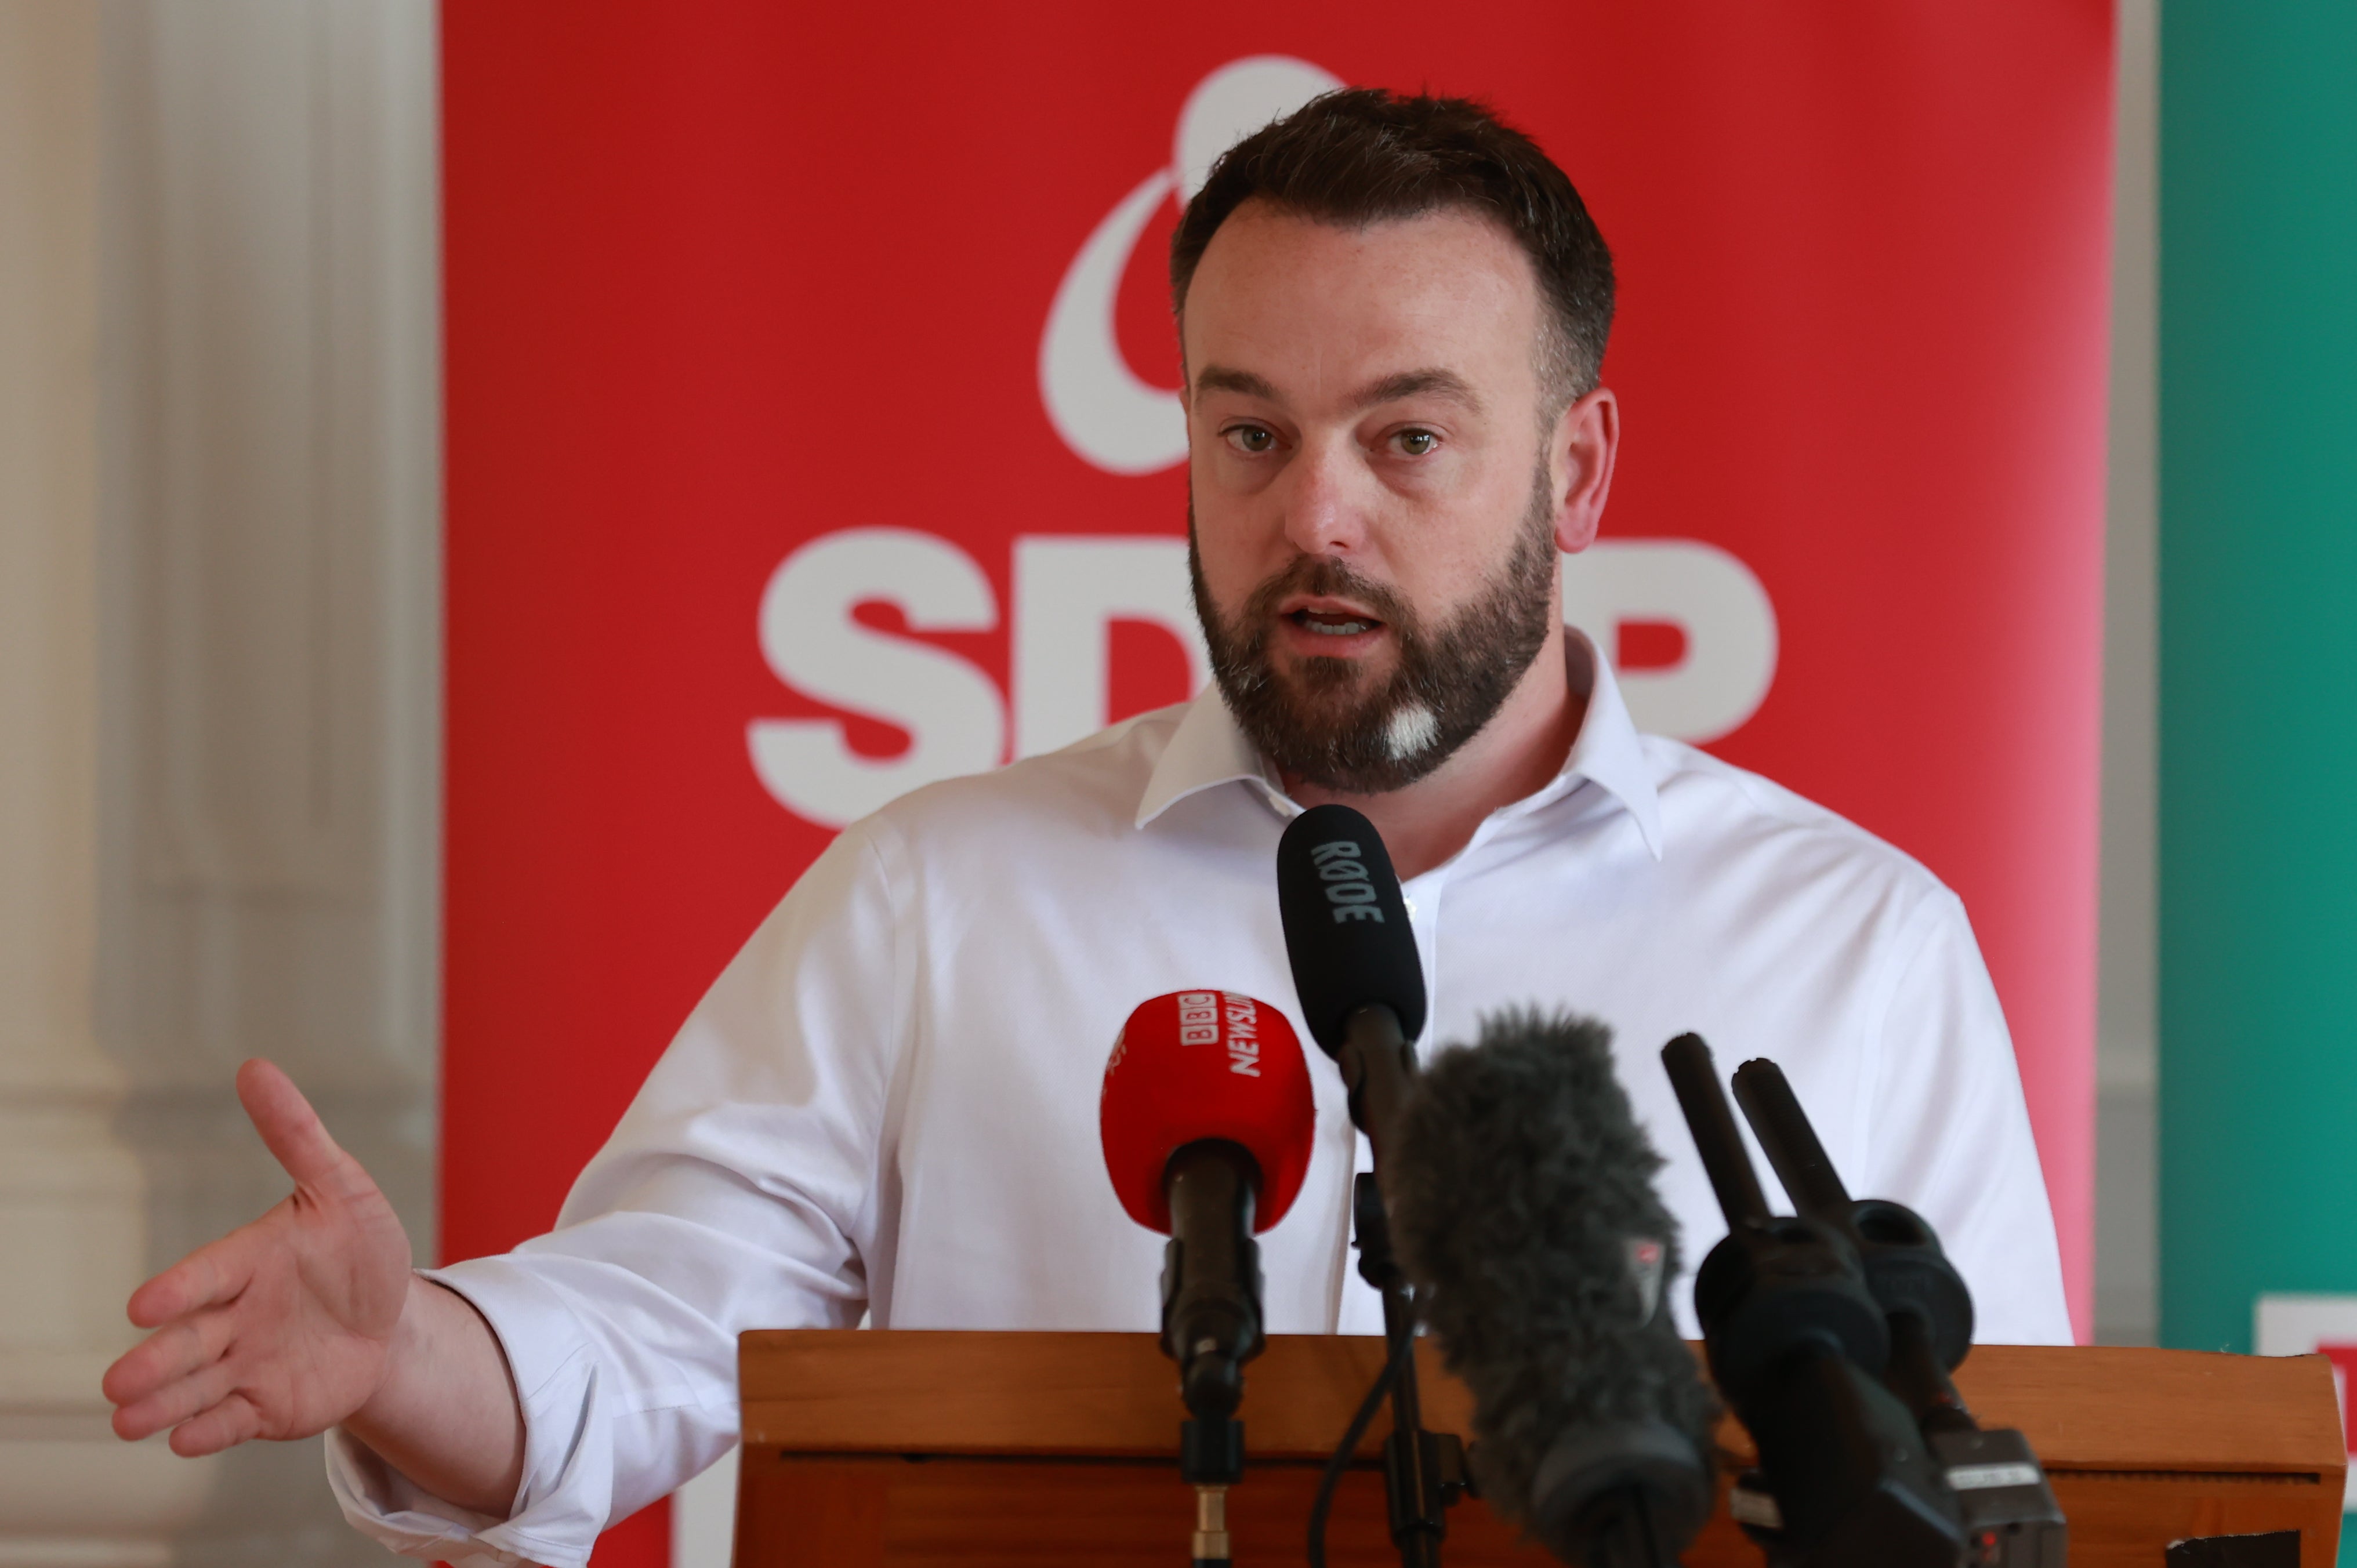 SDLP Leader Colum Eastwood during his party’s manifesto launch at the Verbal Arts Centre in Derry City (Liam McBurney/PA)